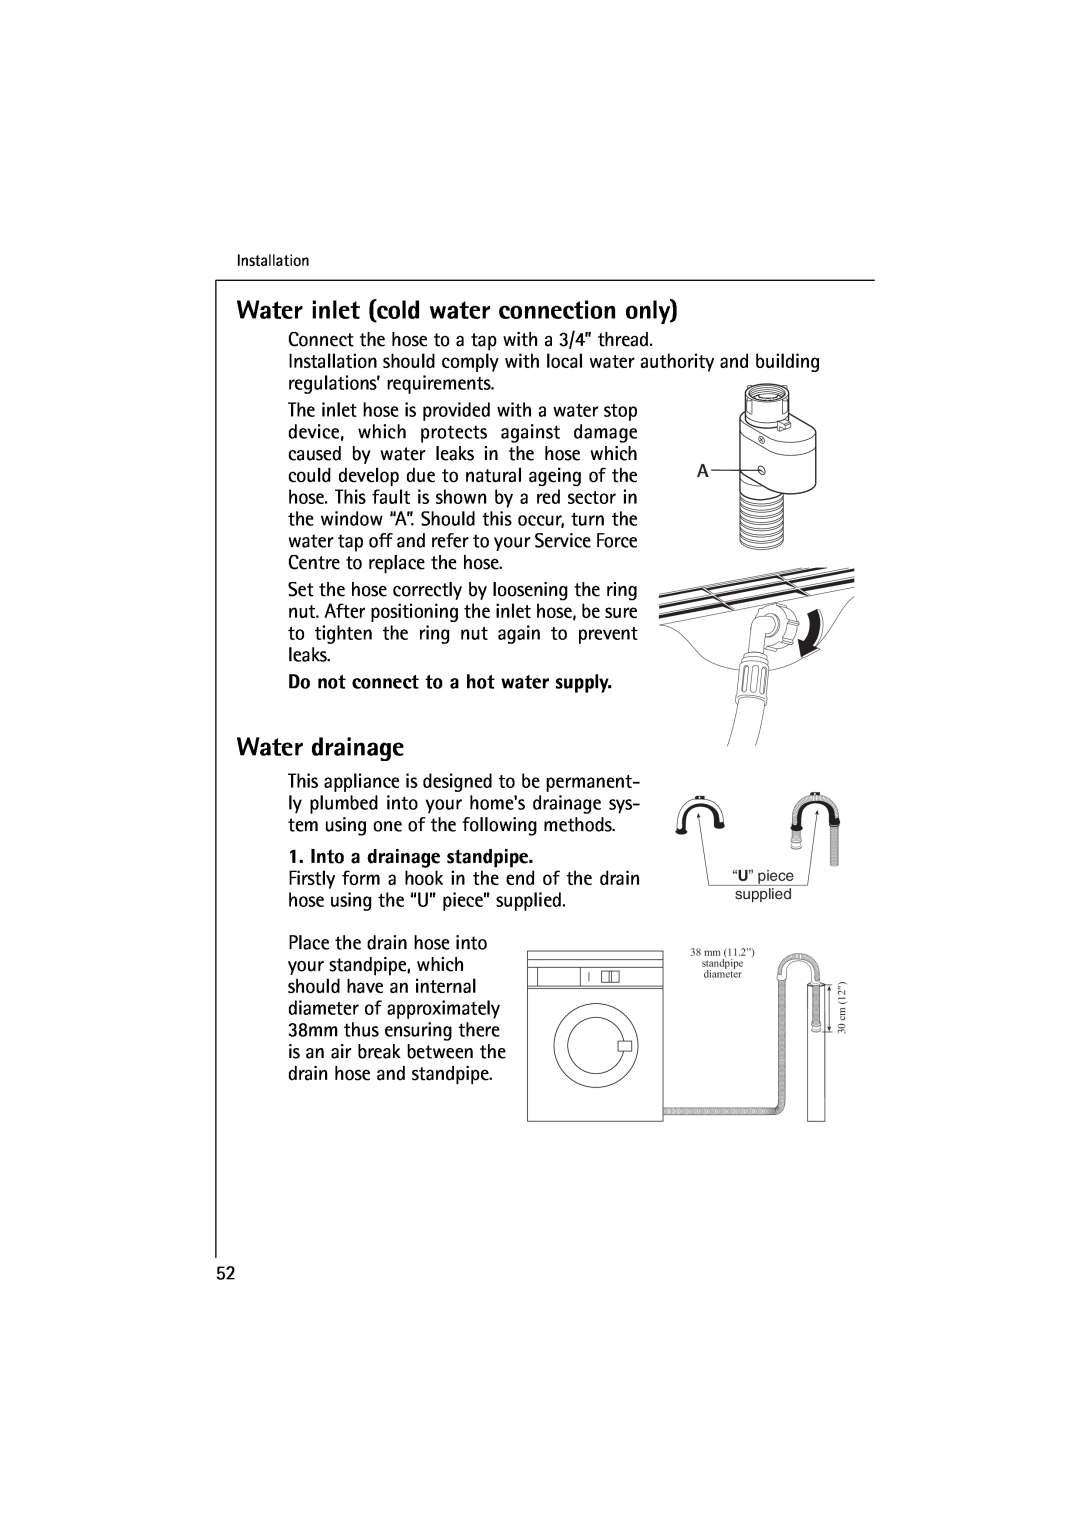 Electrolux 16830 manual Water inlet cold water connection only, Water drainage, Do not connect to a hot water supply 